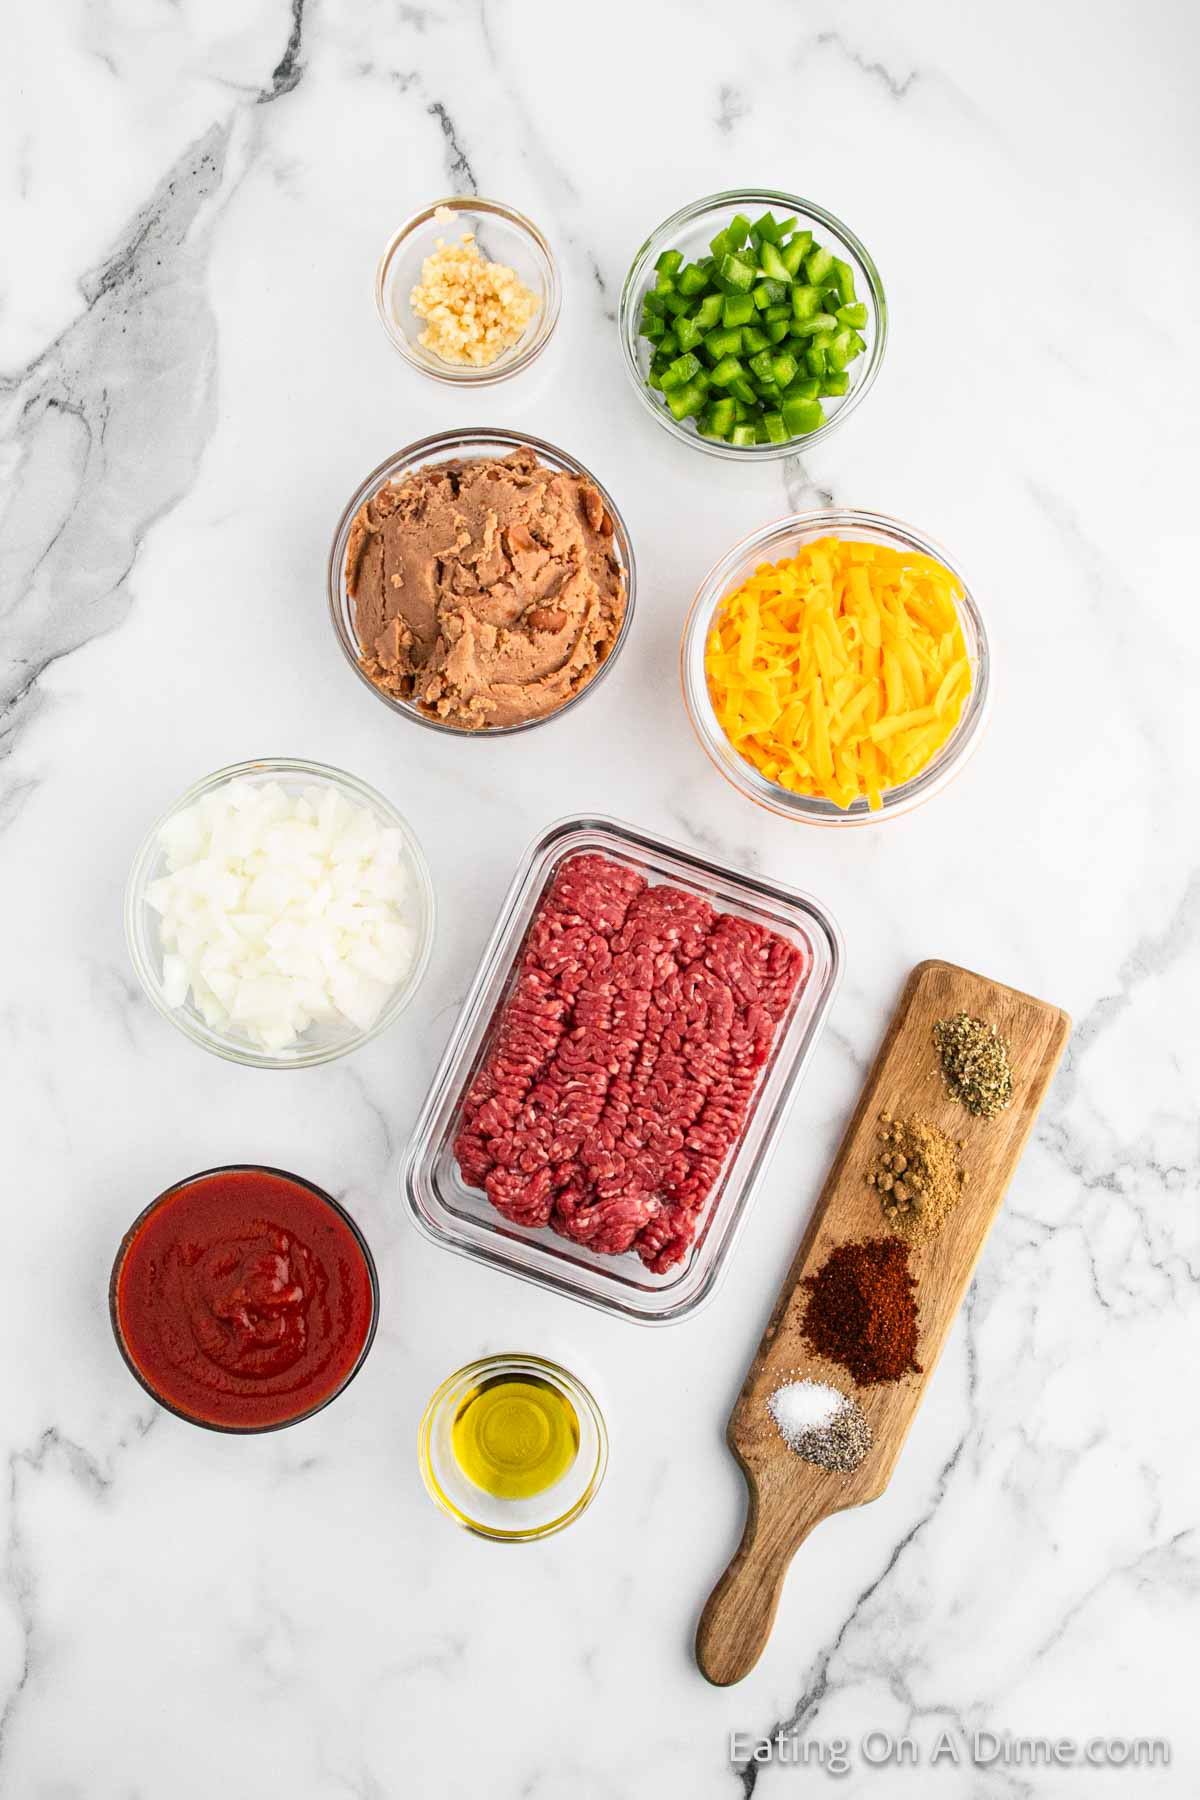 A top-view of taco ingredients on a marble surface showcases everything needed for Beef Chimichangas. Ground beef, shredded cheese, chopped onions, green bell peppers, refried beans, minced garlic, and tomato sauce are arranged in bowls. A wooden board holds various spices. A small bowl of olive oil is also present.